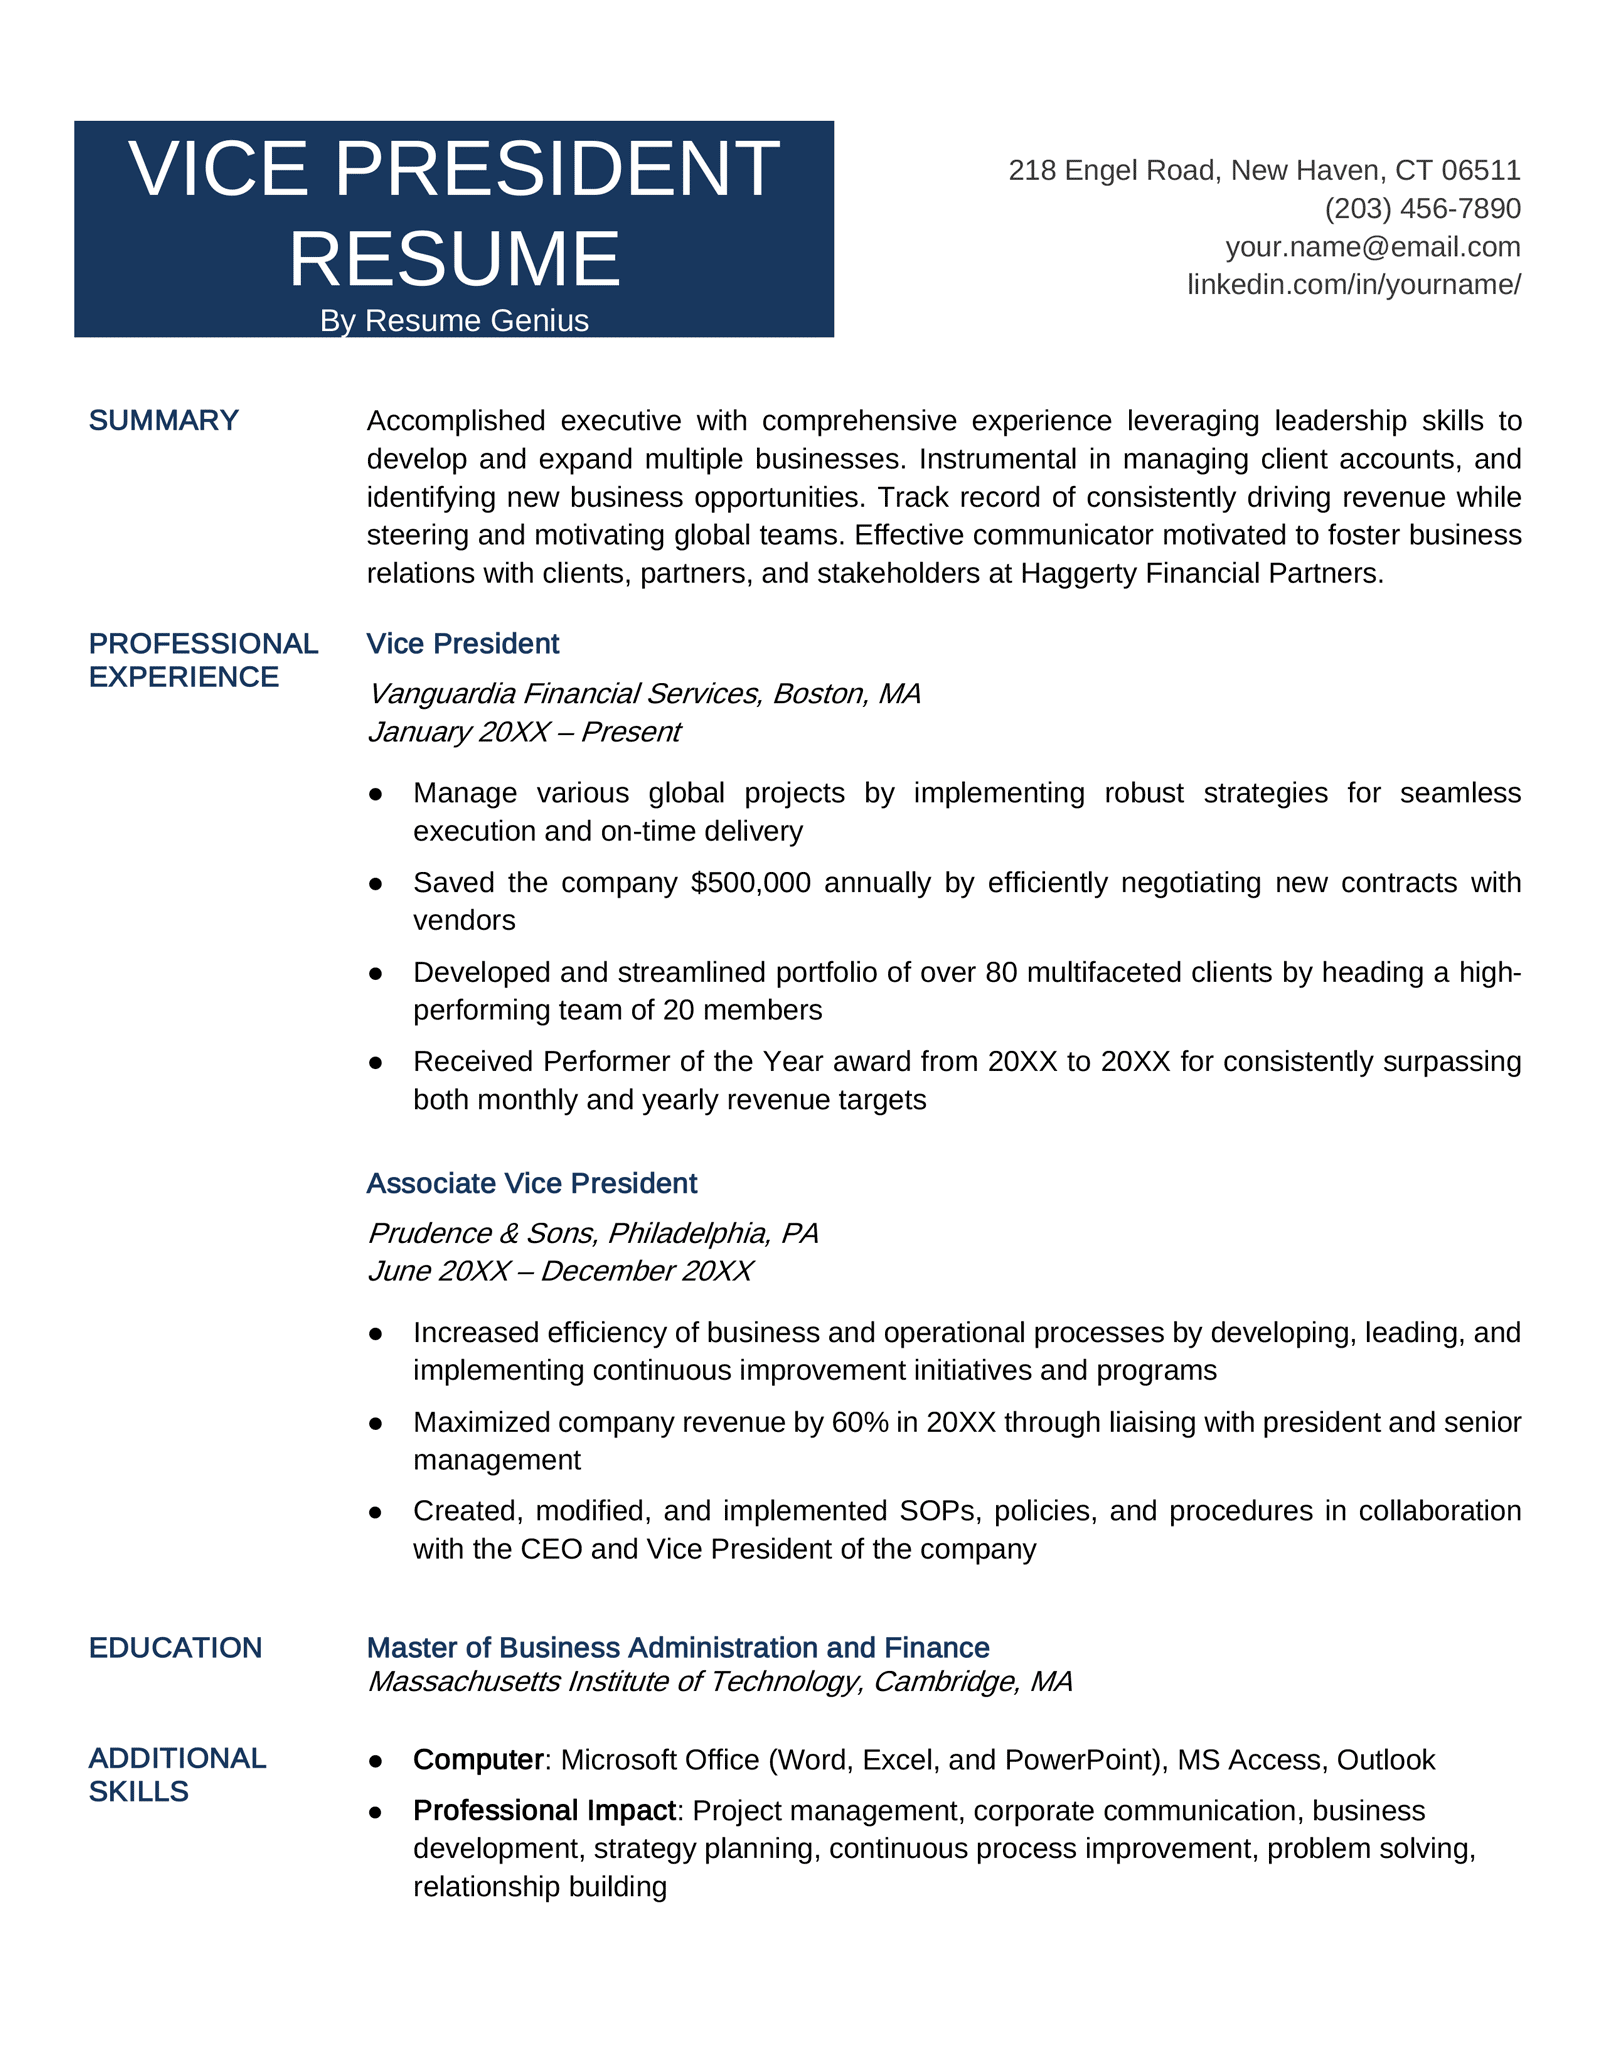 A vice president resume example with a blue header and sections for the applicant's summary, professional experience, education, and additional skills